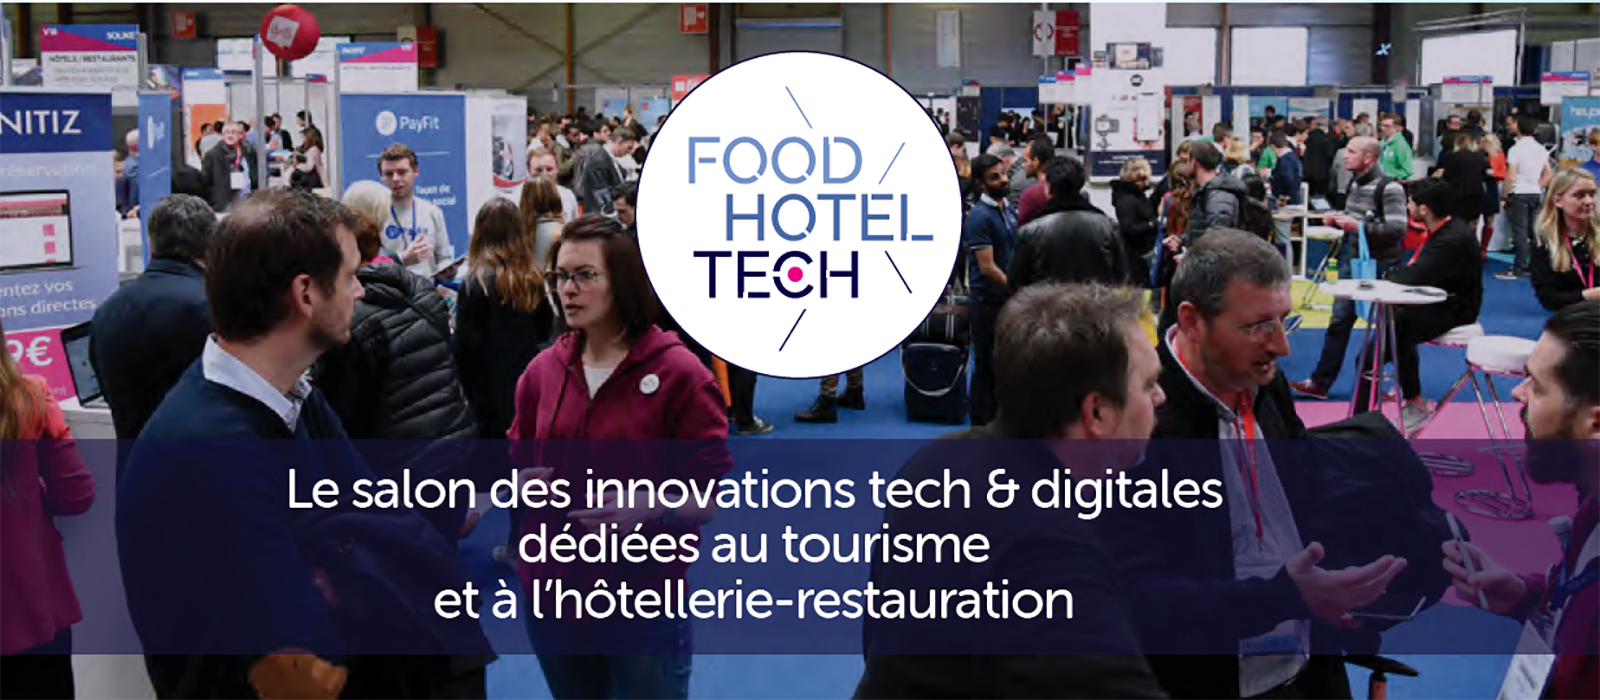 foodhoteltech crise sanitaire